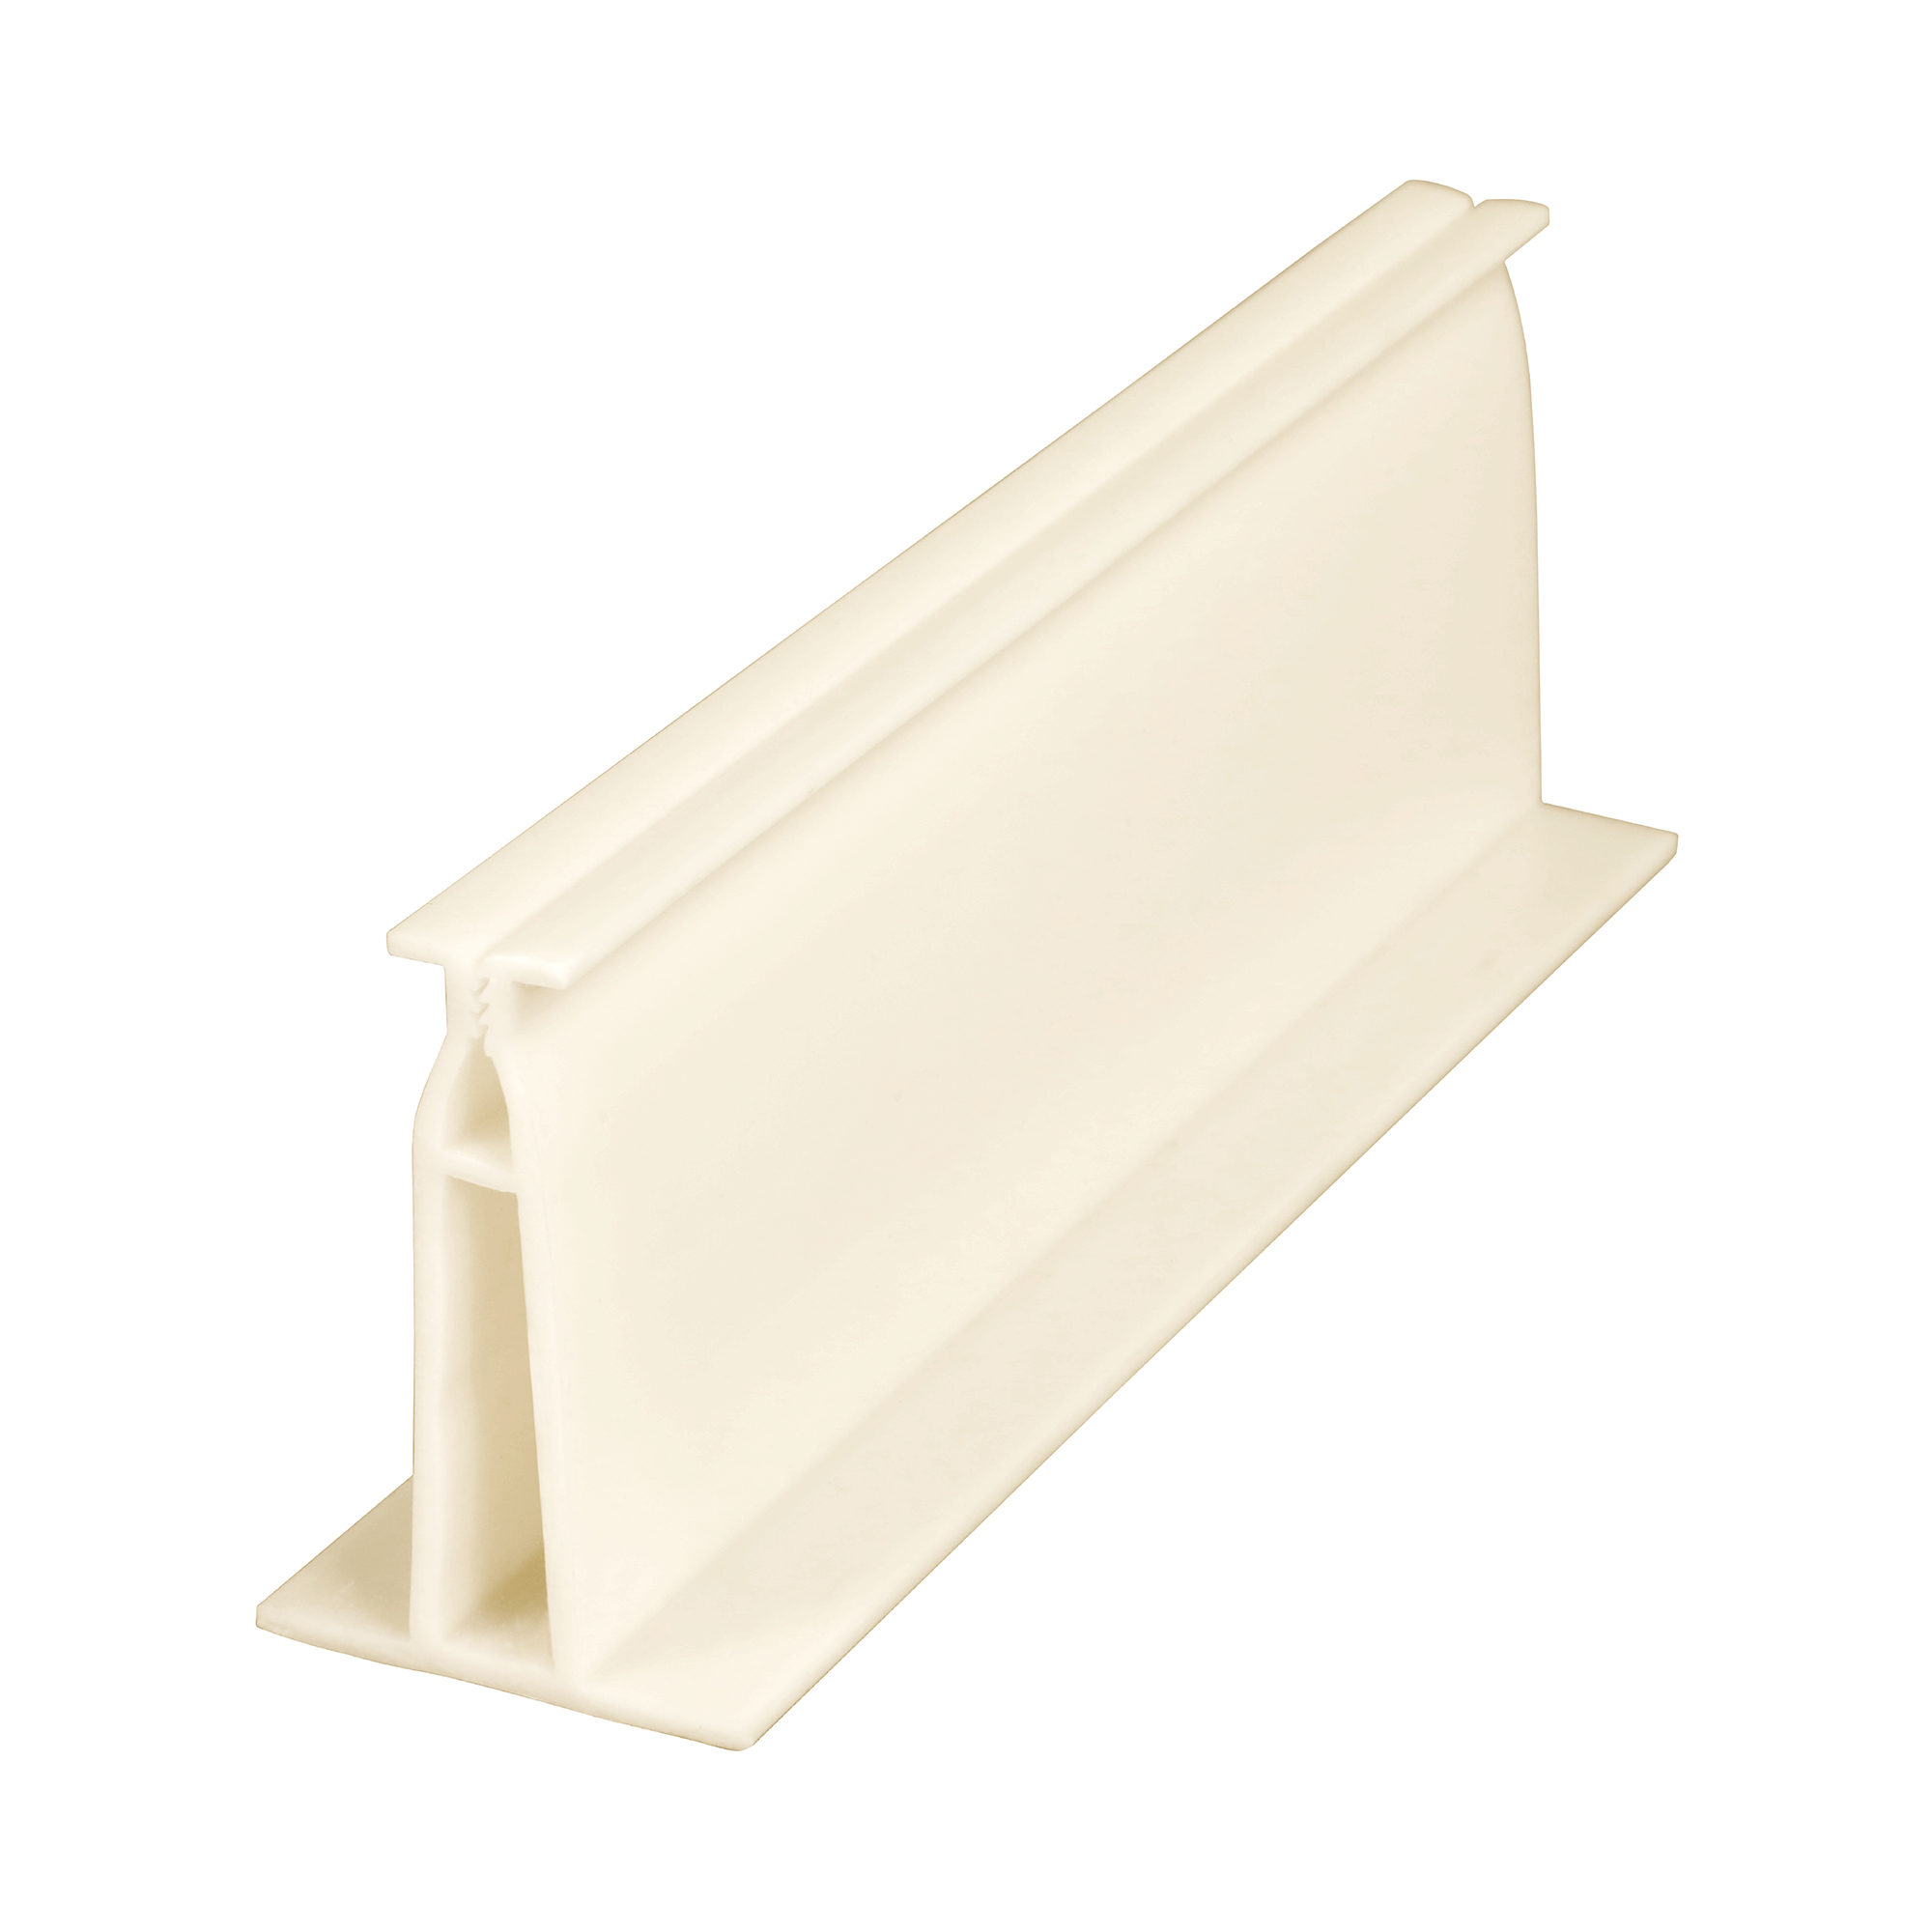 Telascapes Midwall 2inch Pvc Neutral 2000x2000 1